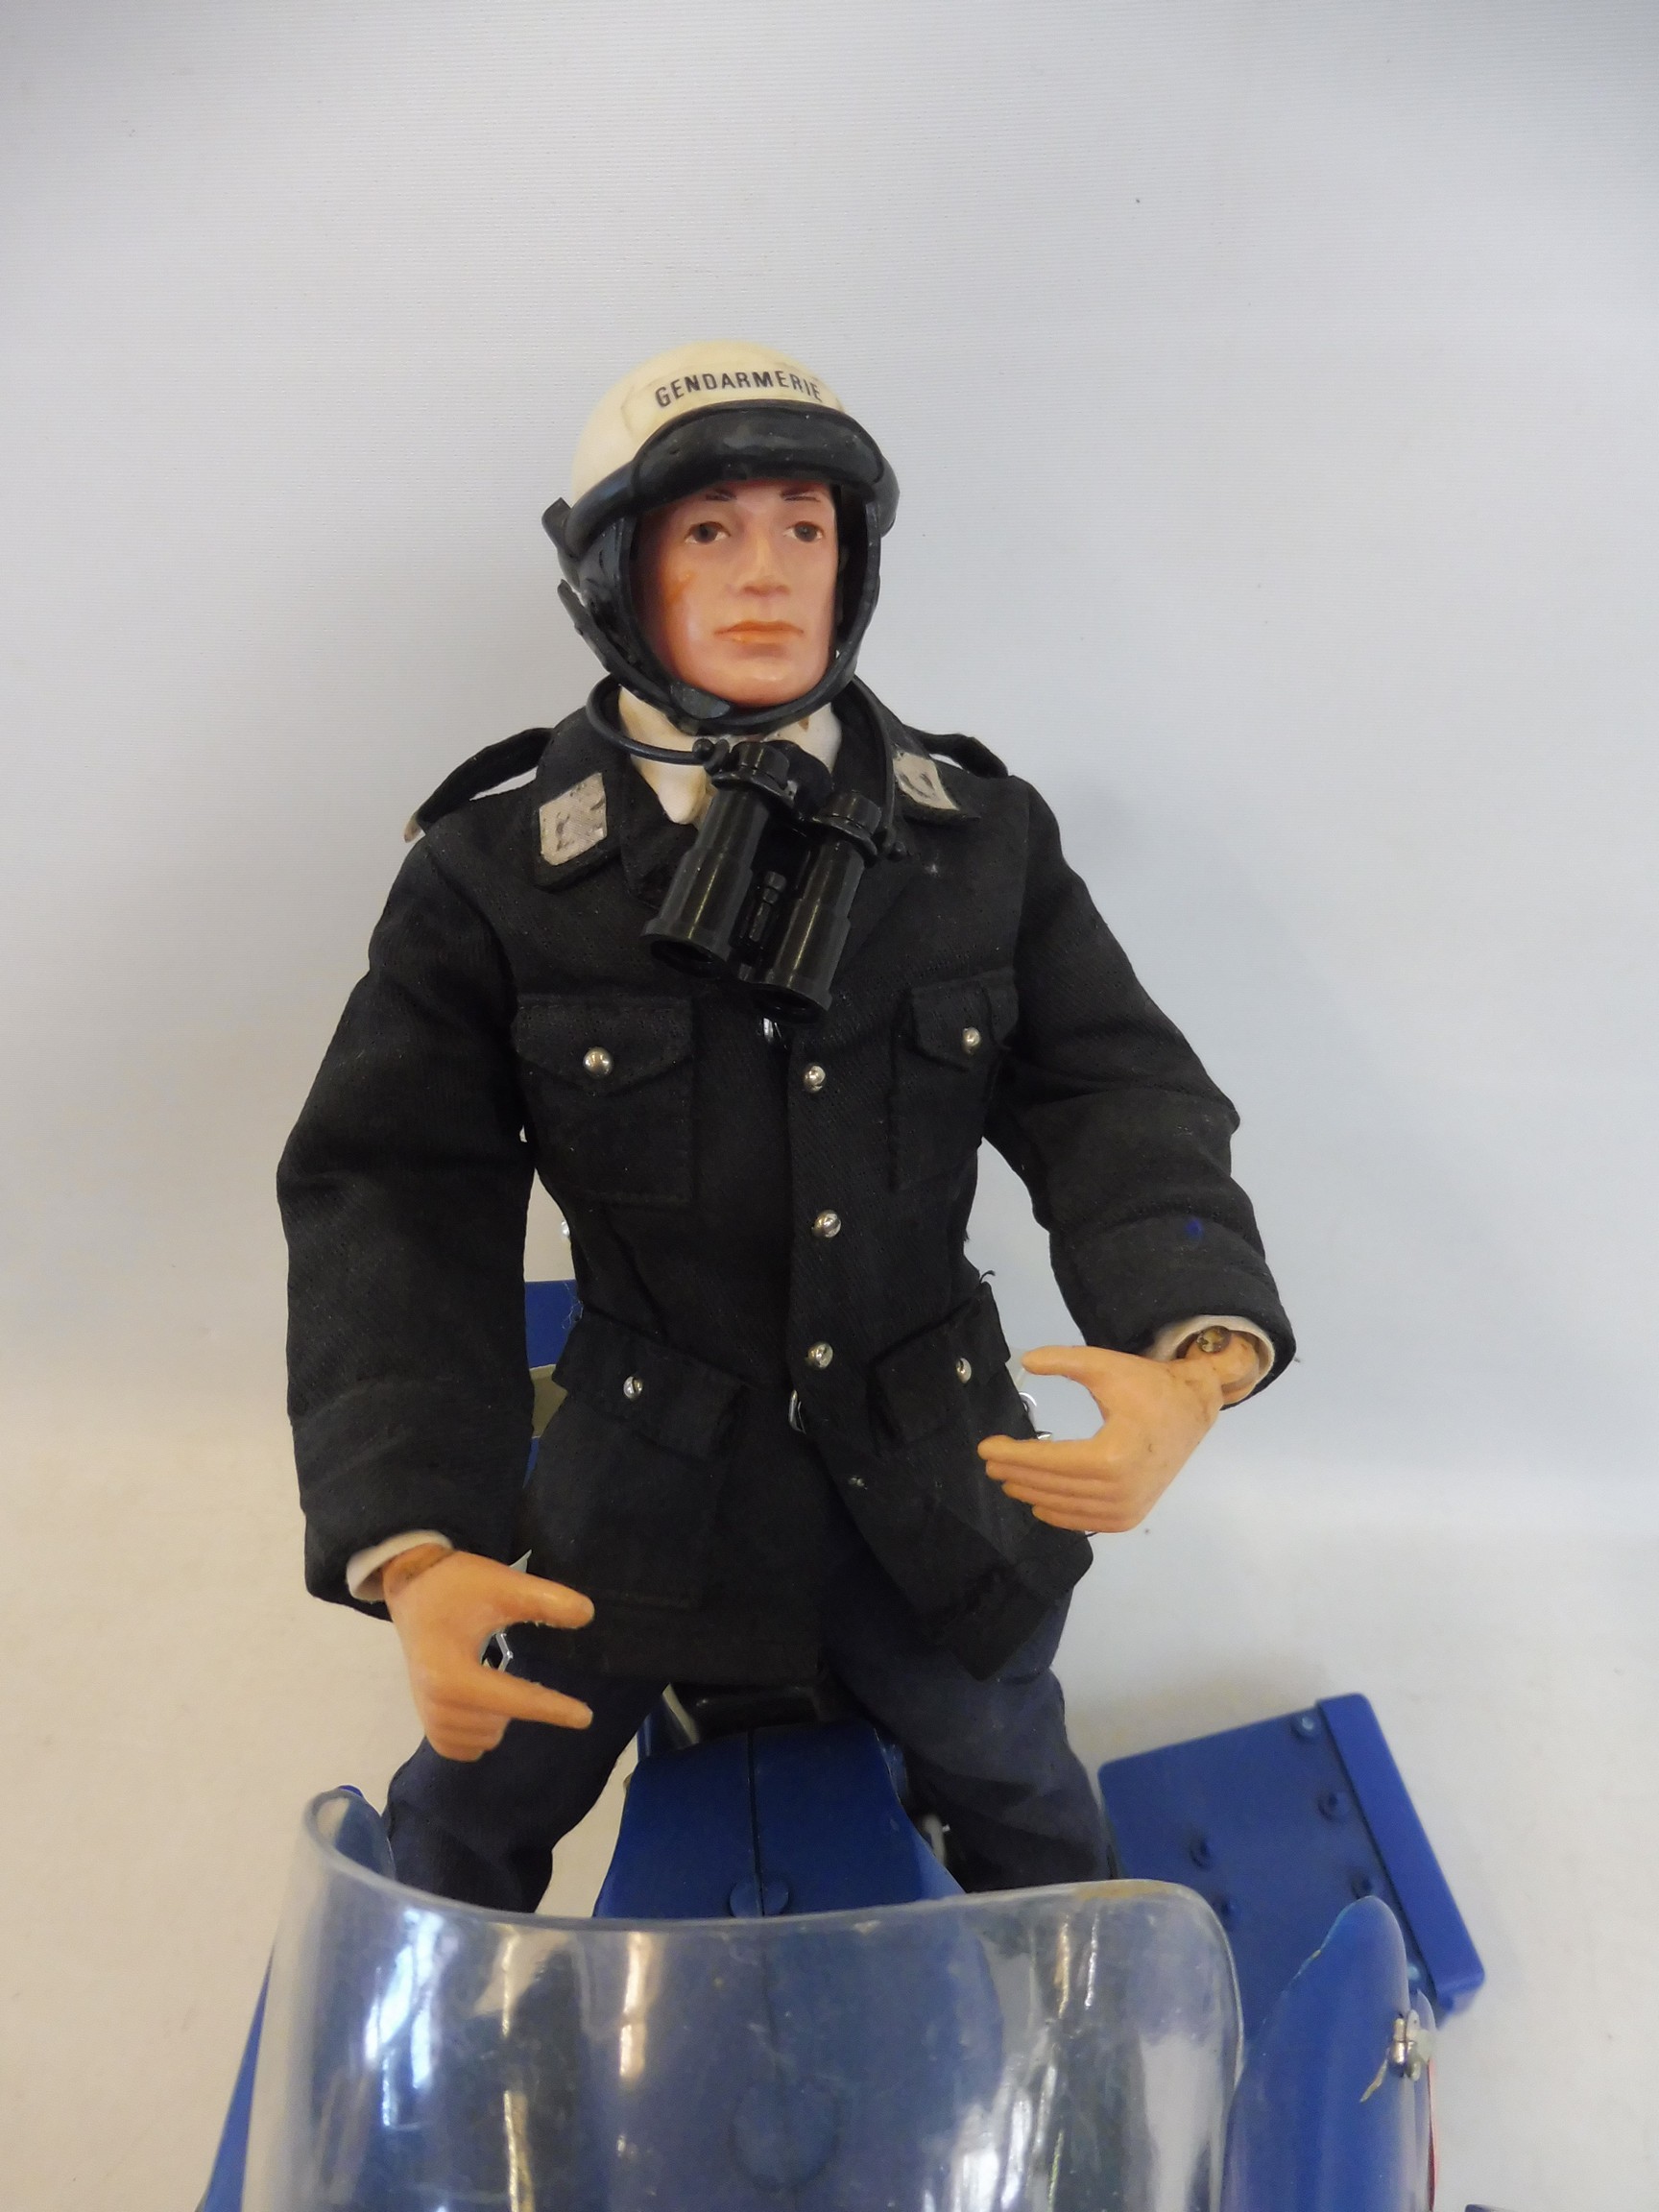 A rare Action Joe Gendarmerie motorbike and figure, complete with accessories. - Image 2 of 3